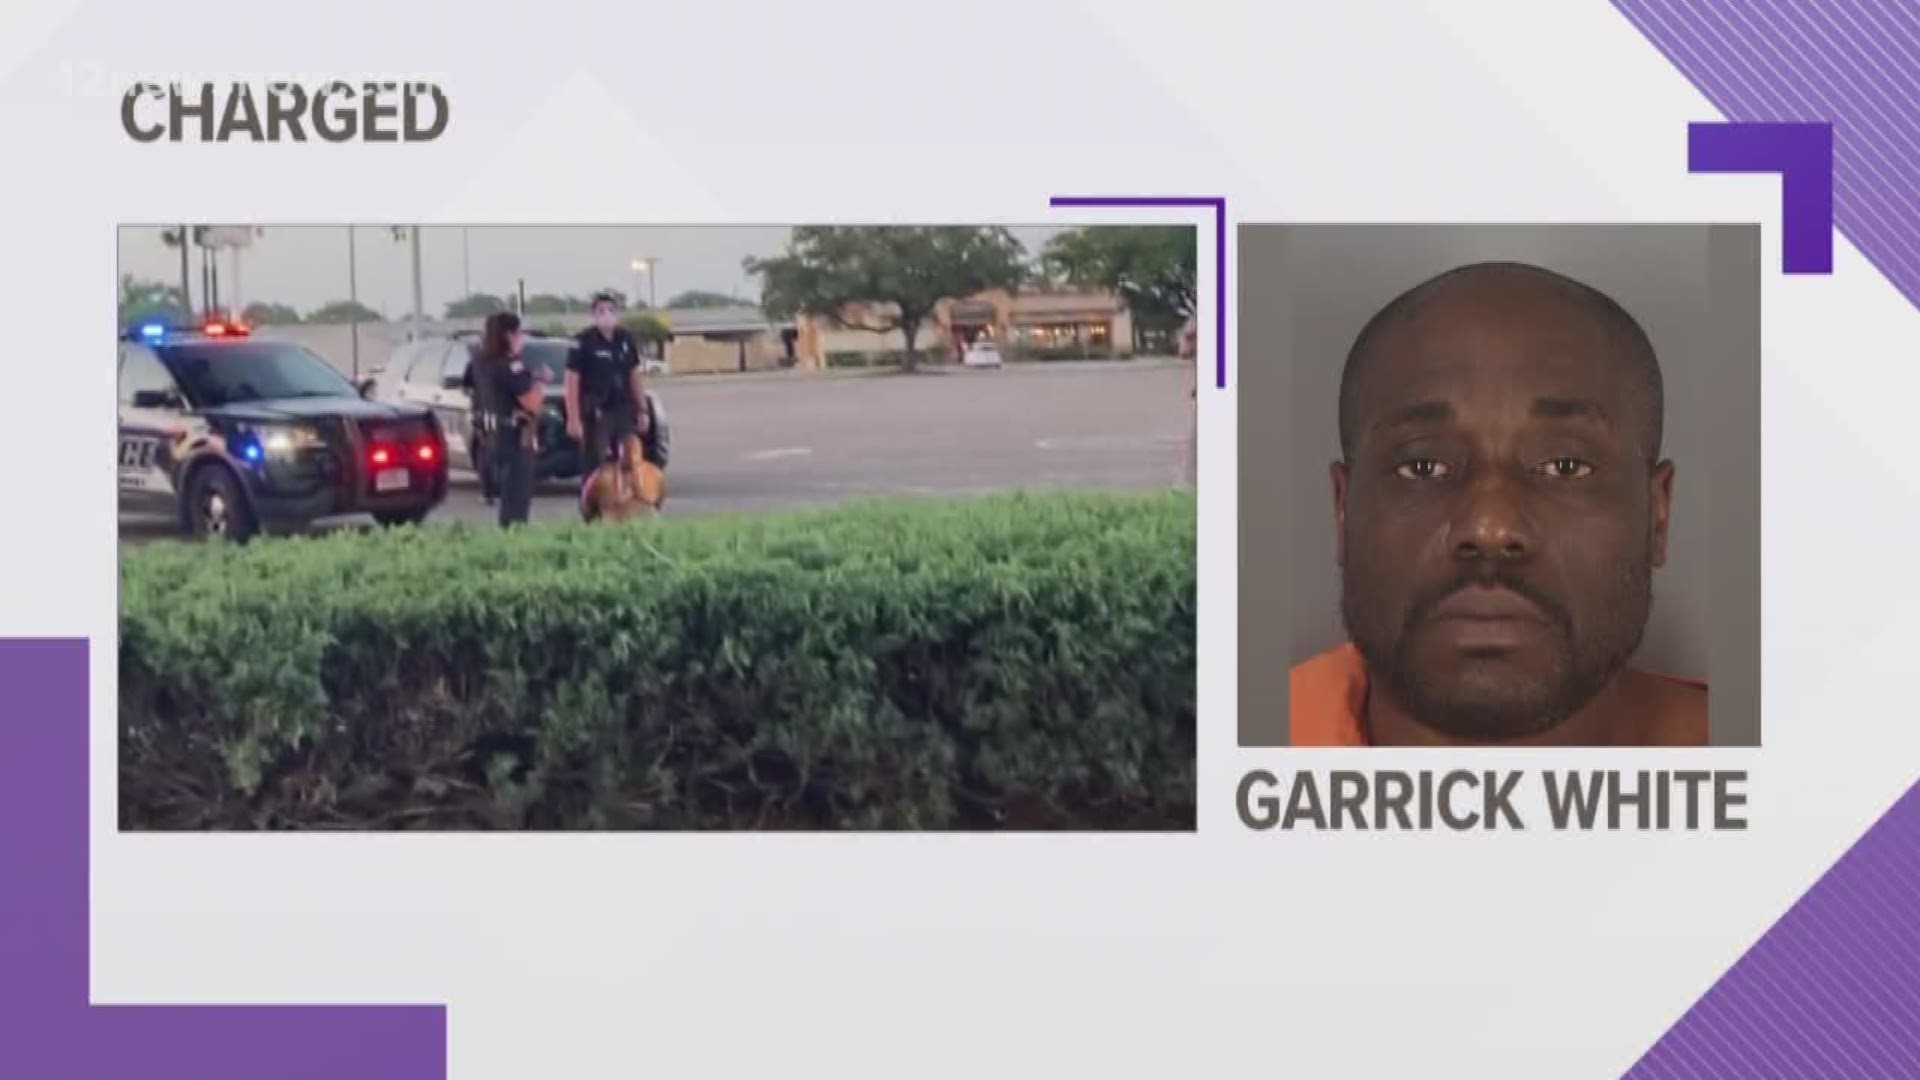 Beaumont Police arrested Garrick White. Officers said he drove a vehicle through the mall entrance.